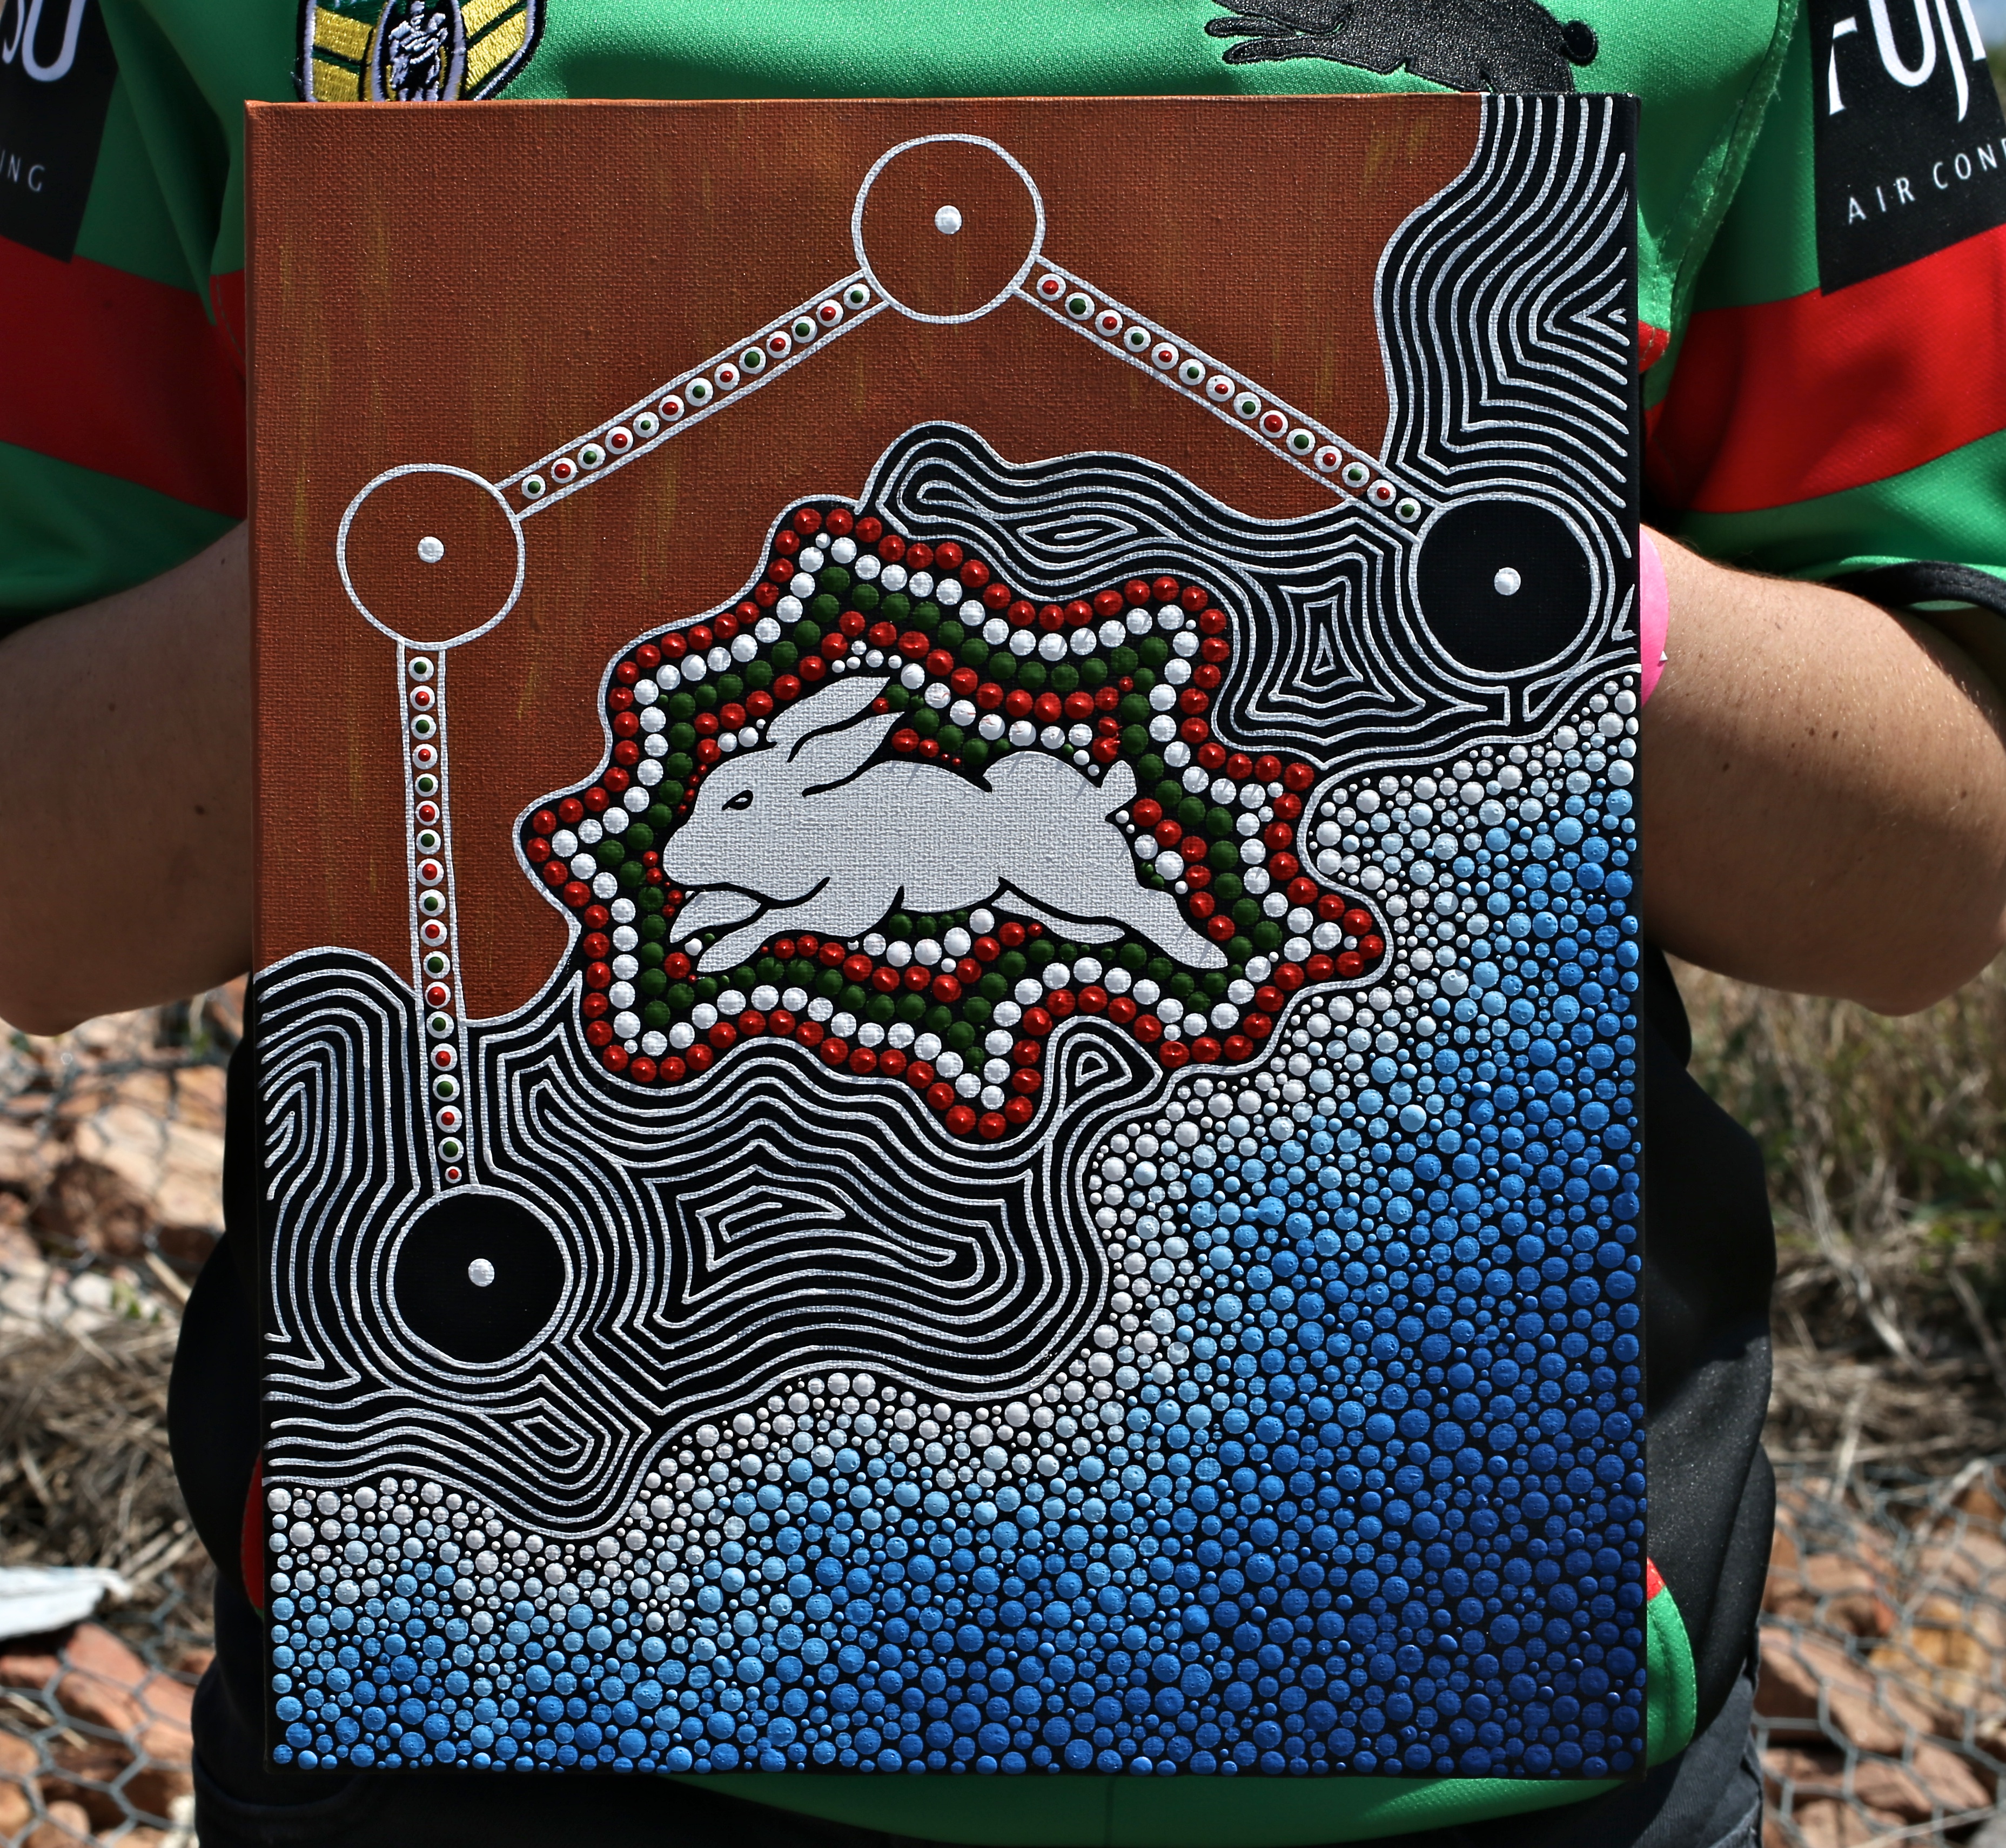 Souths Sydney Rabbitohs Wallpaper Posters Image Pack Mar